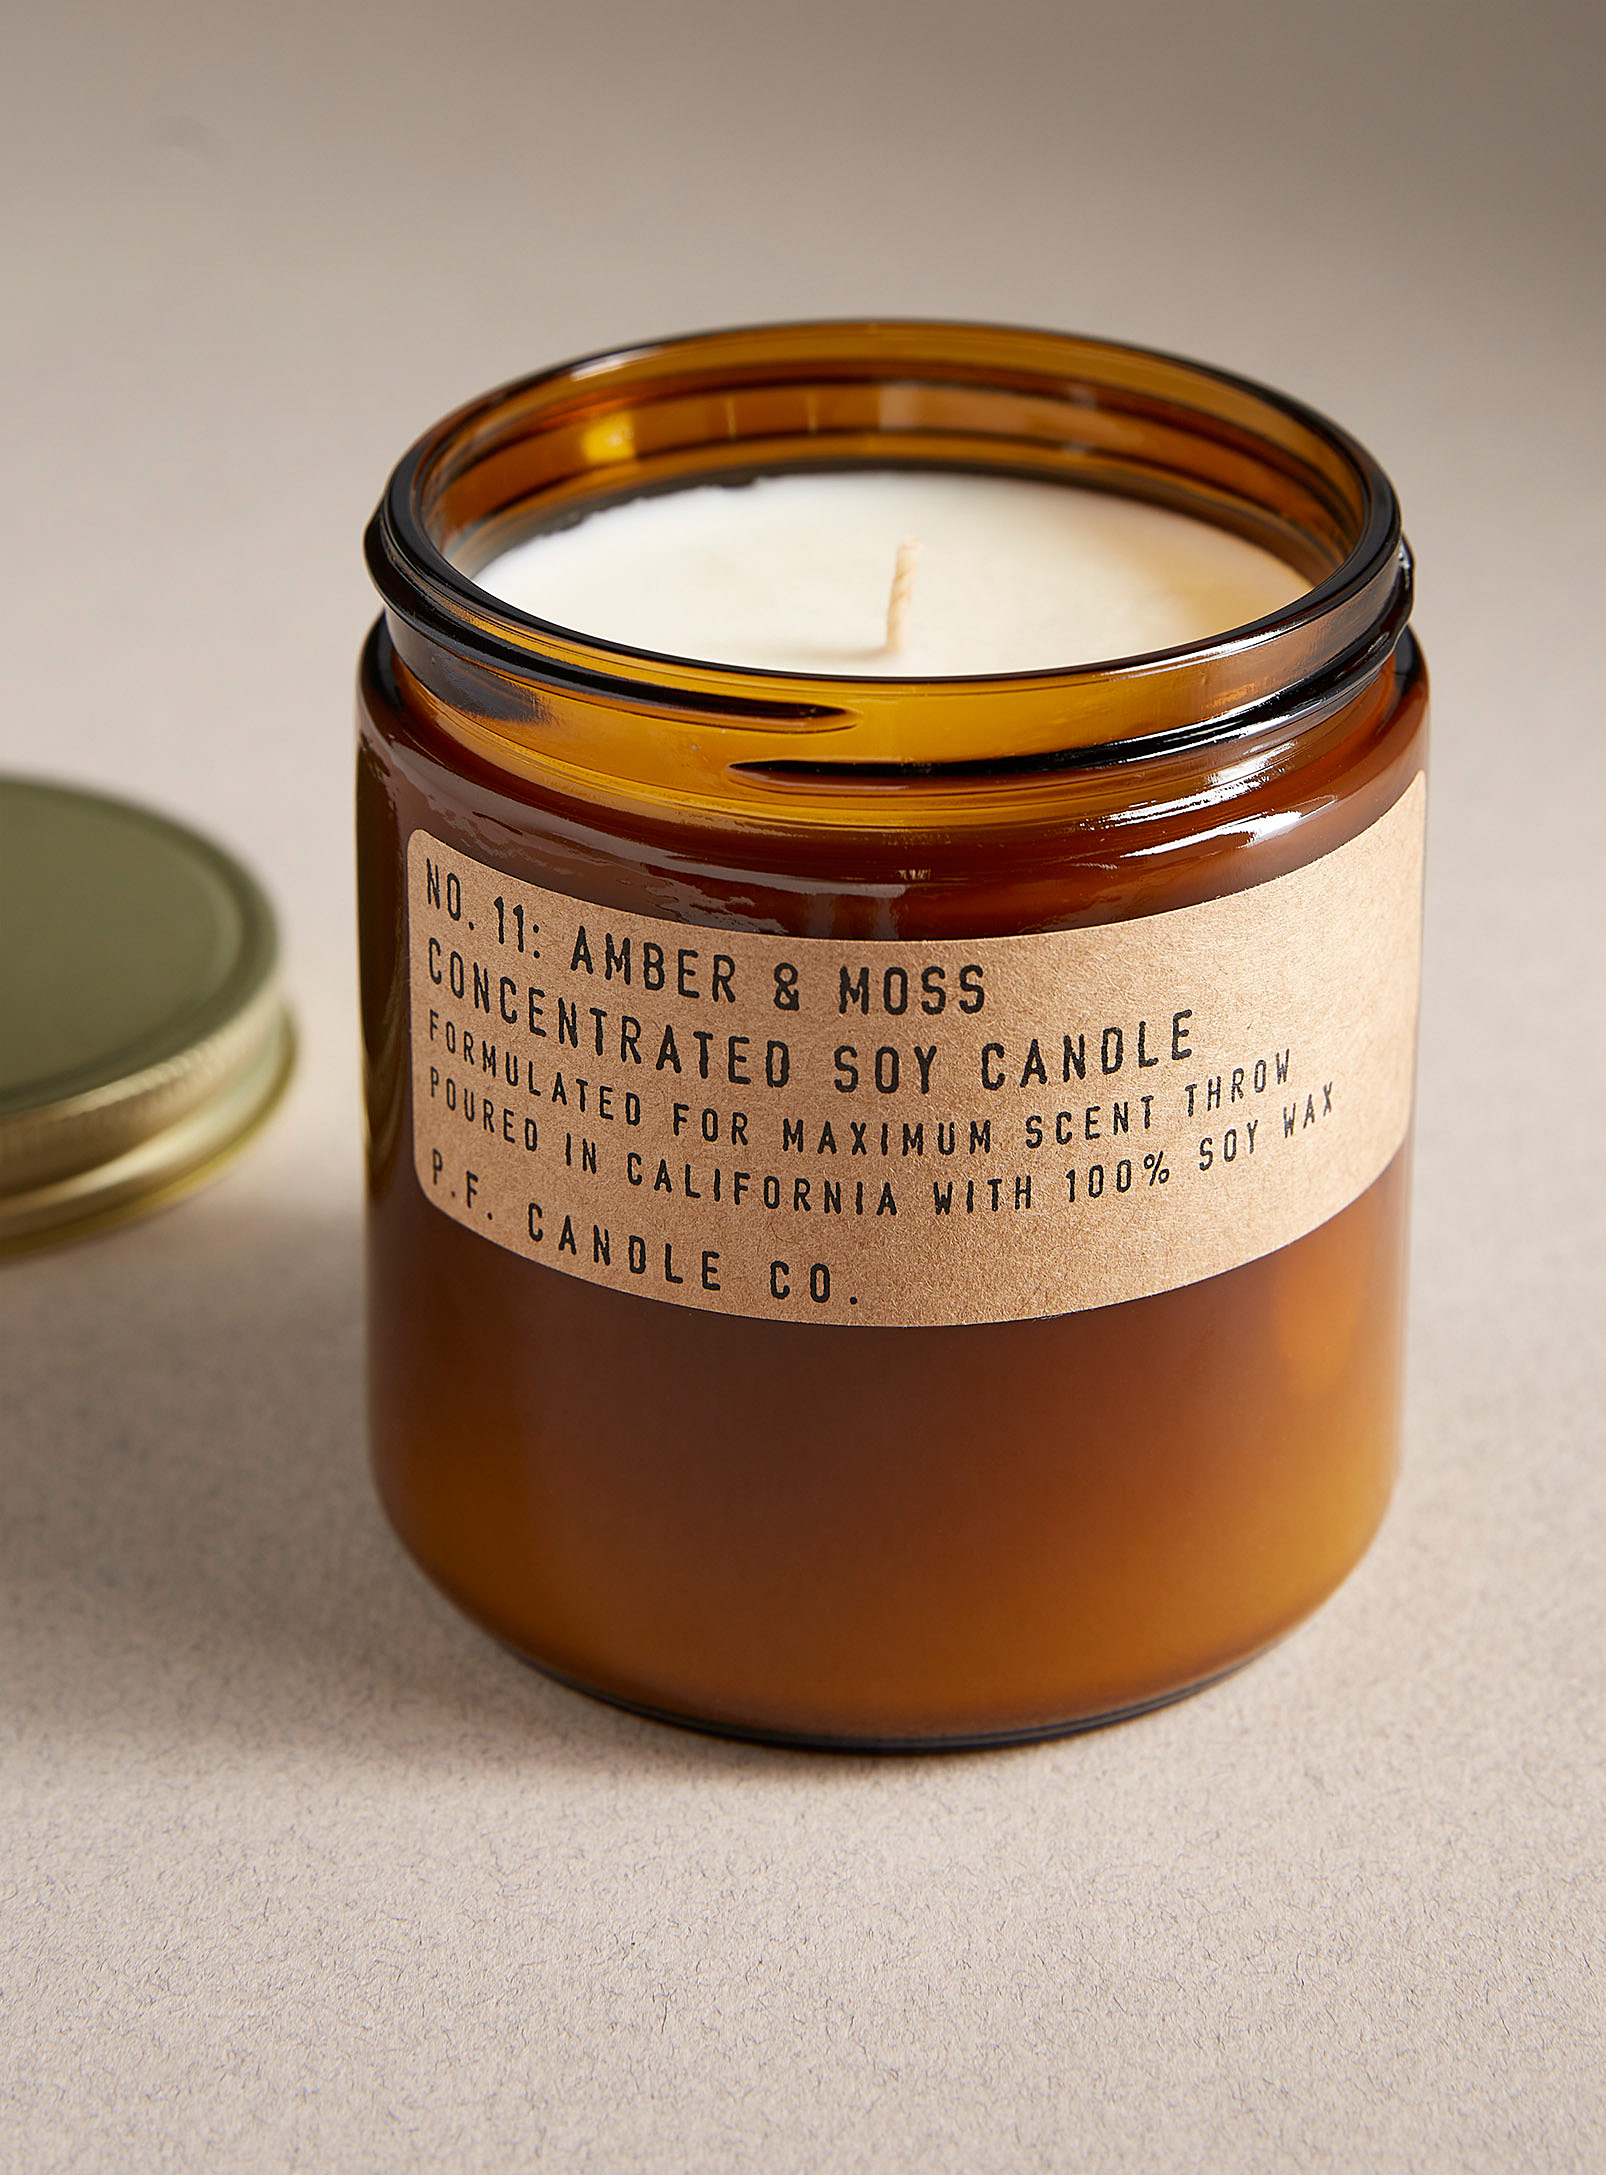 P.F. Candle Co. - Amber moss scented candle 354 g